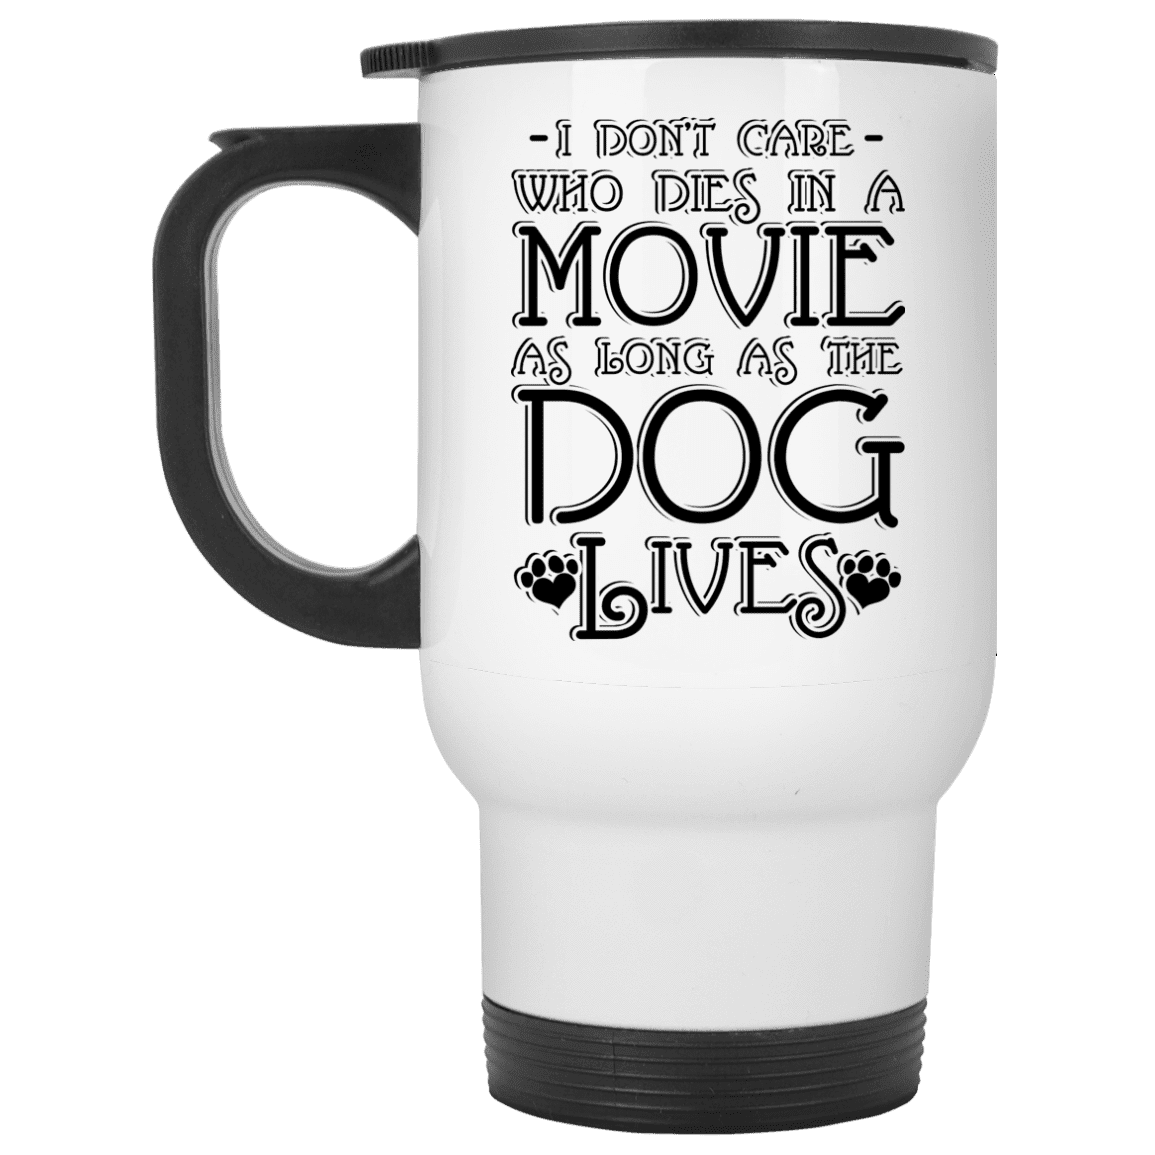 I Dont Care Who Dies In A Movie - Mugs.